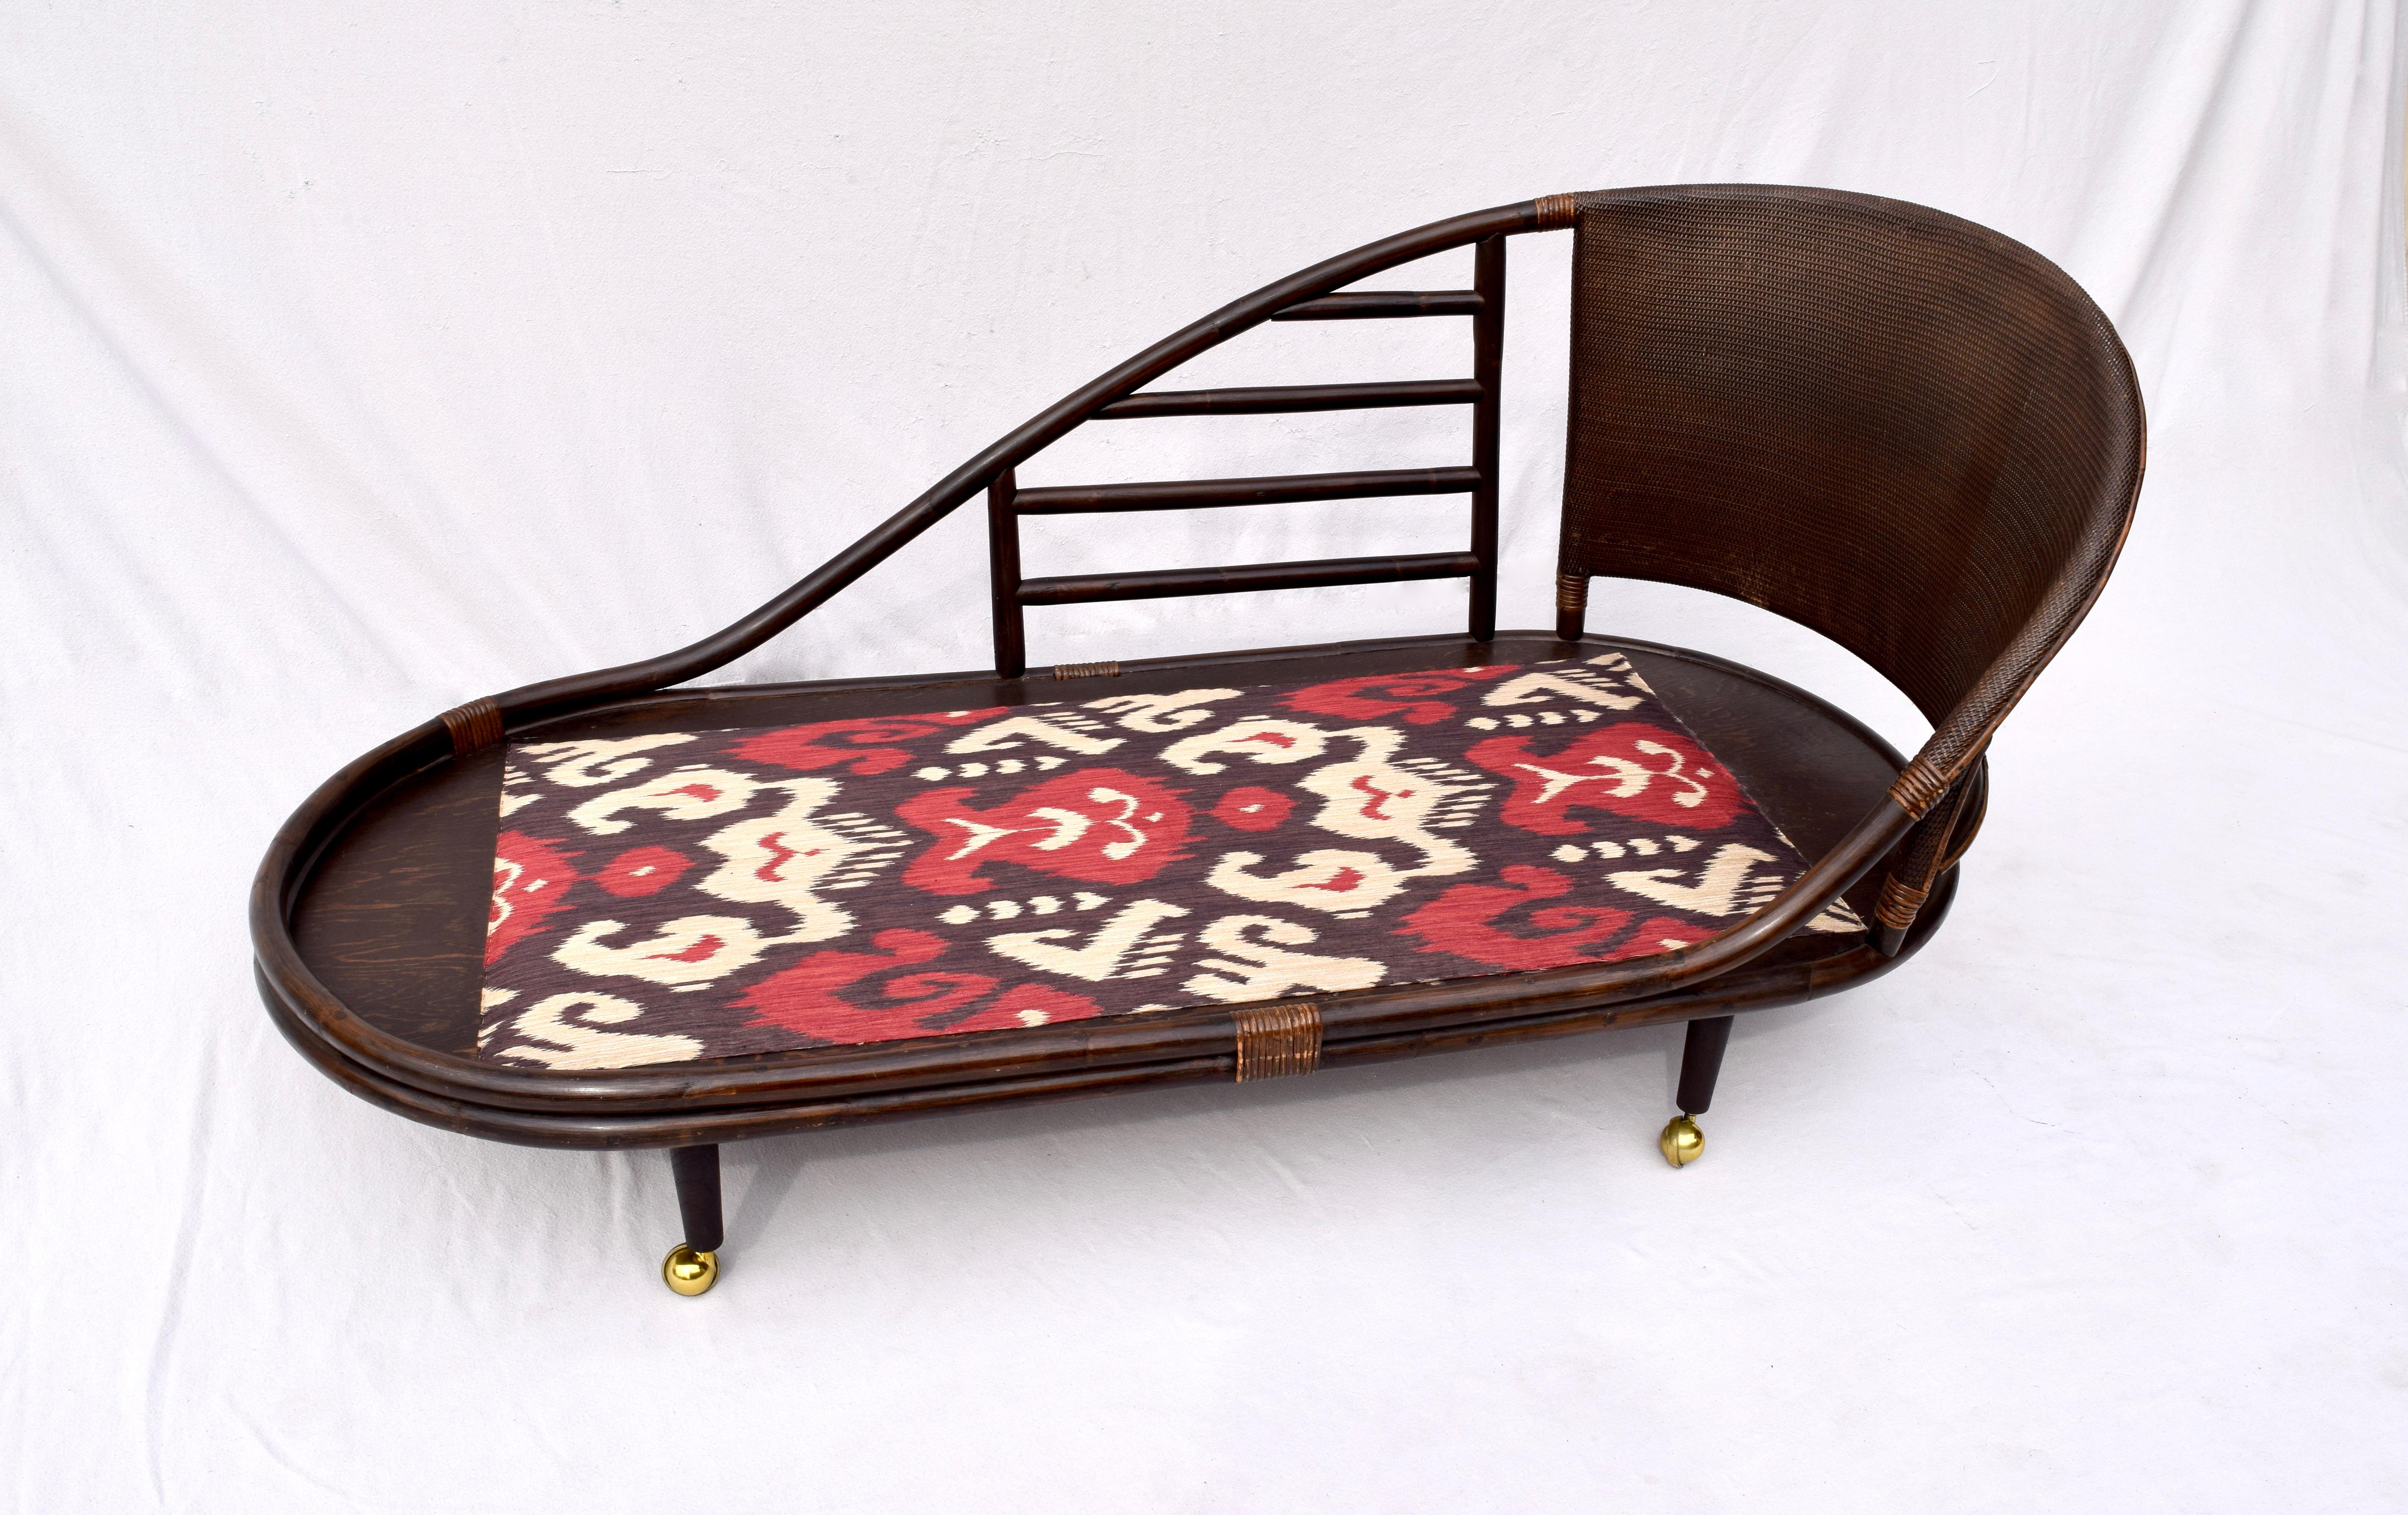 20th Century Chinoiserie Rattan Grasscloth Chaise Lounge in Ikat